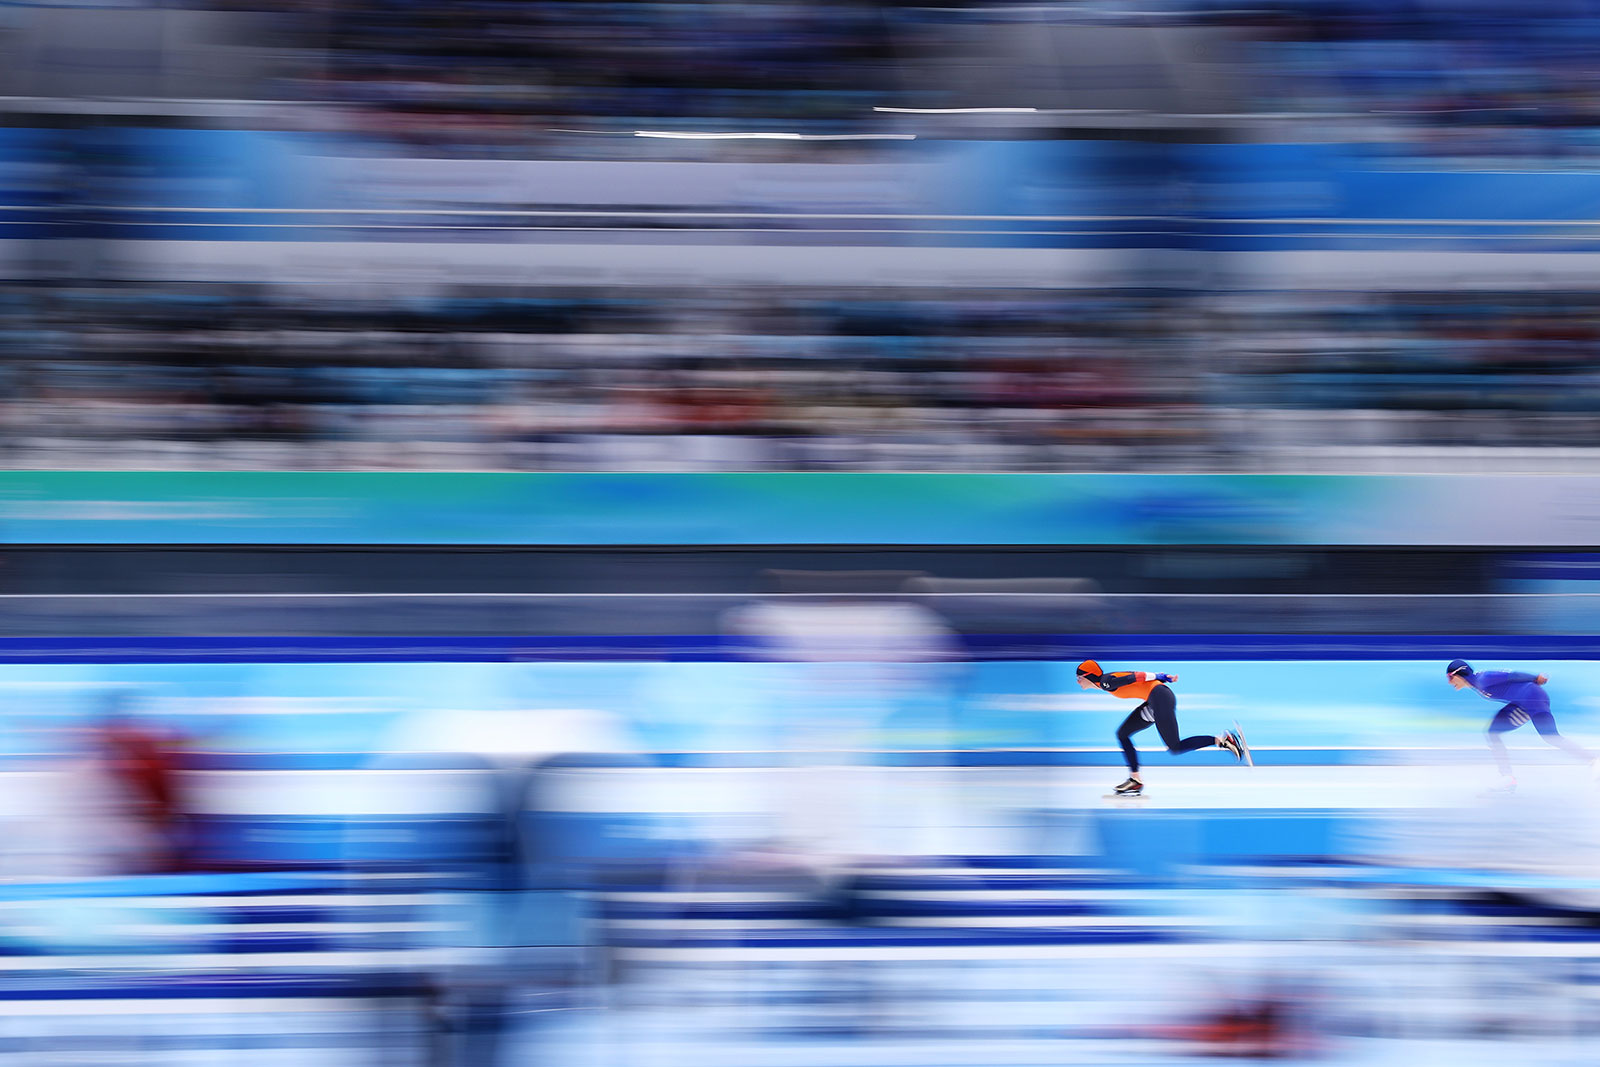 Dutch speed skater Irene Schouten competes in the women's 5,000m on February 10. Schouten won the event in stunning fashion, breaking a 20-year-old Olympic record set by Germany's Claudia Pechstein at the Salt Lake City Games in 2002.